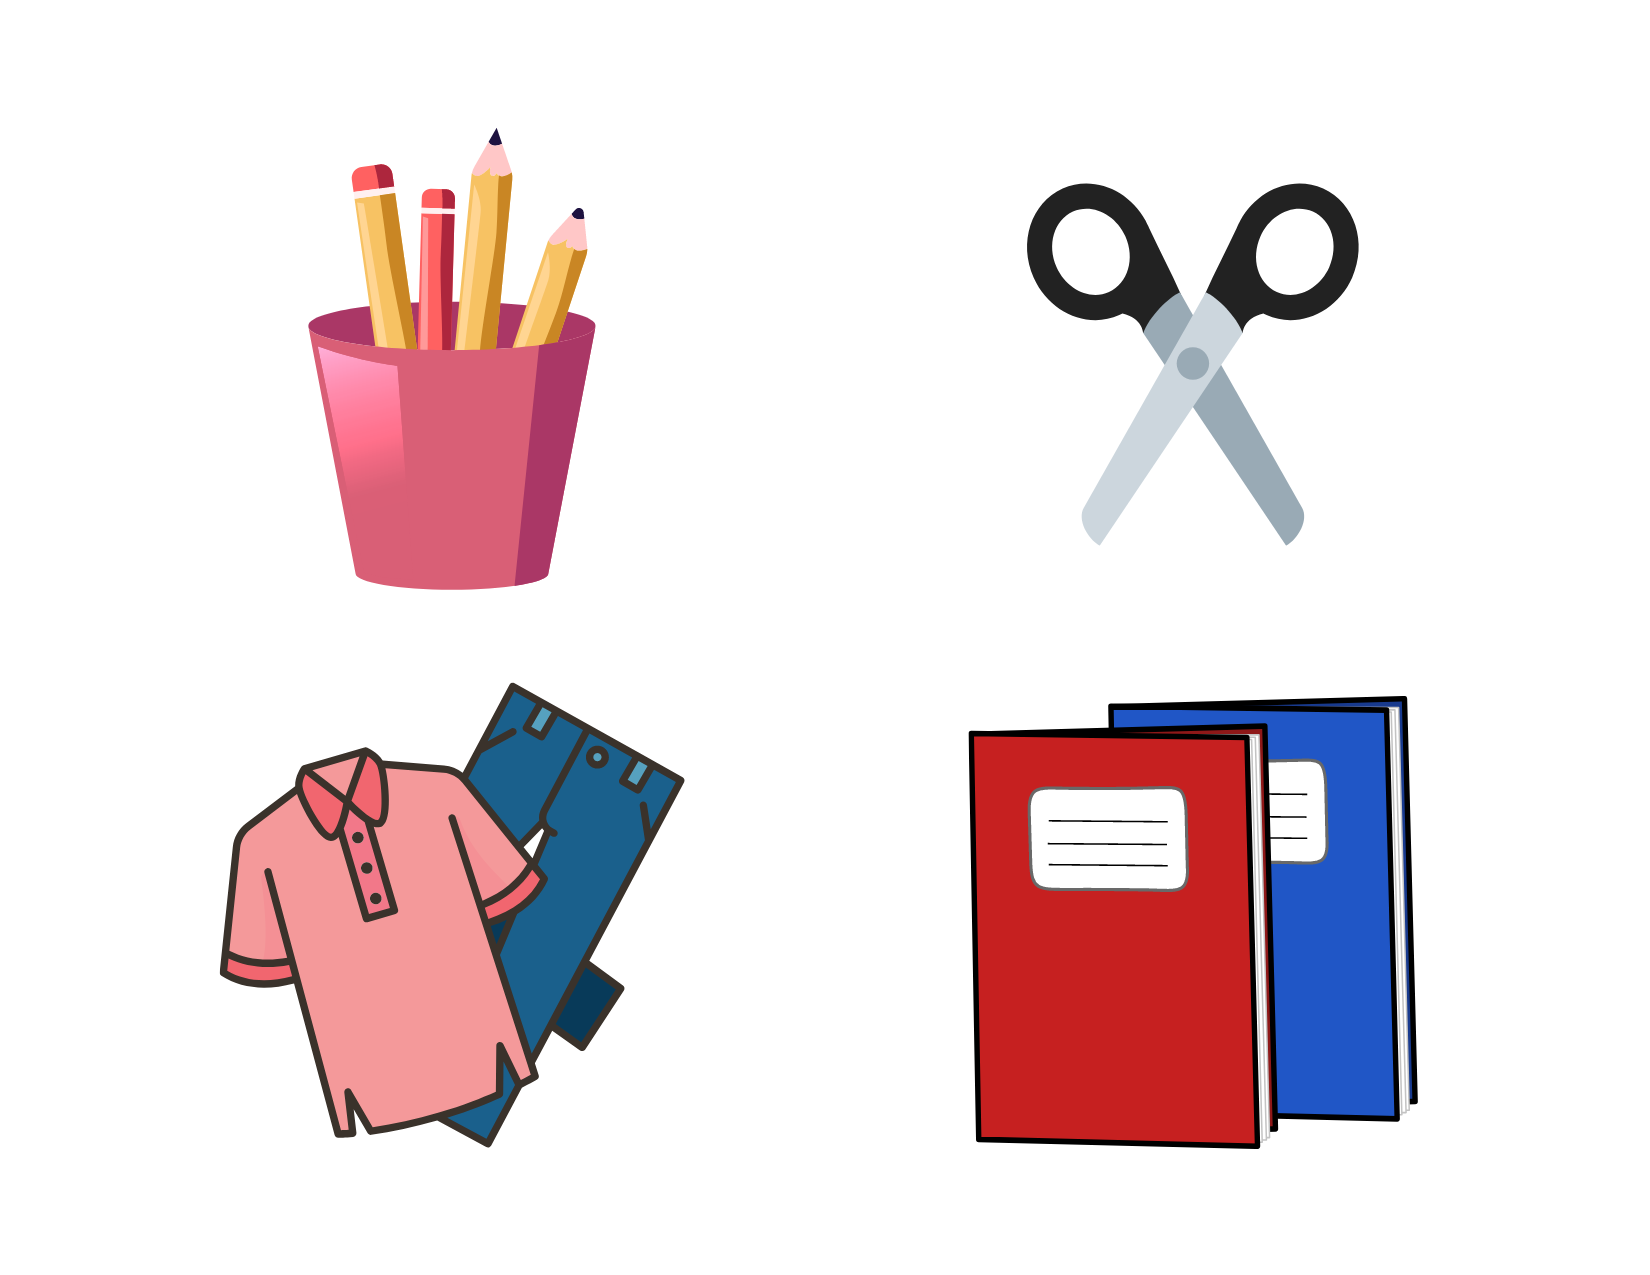 Images of scissors, a cup with pencils in it, clothes, and notebooks.